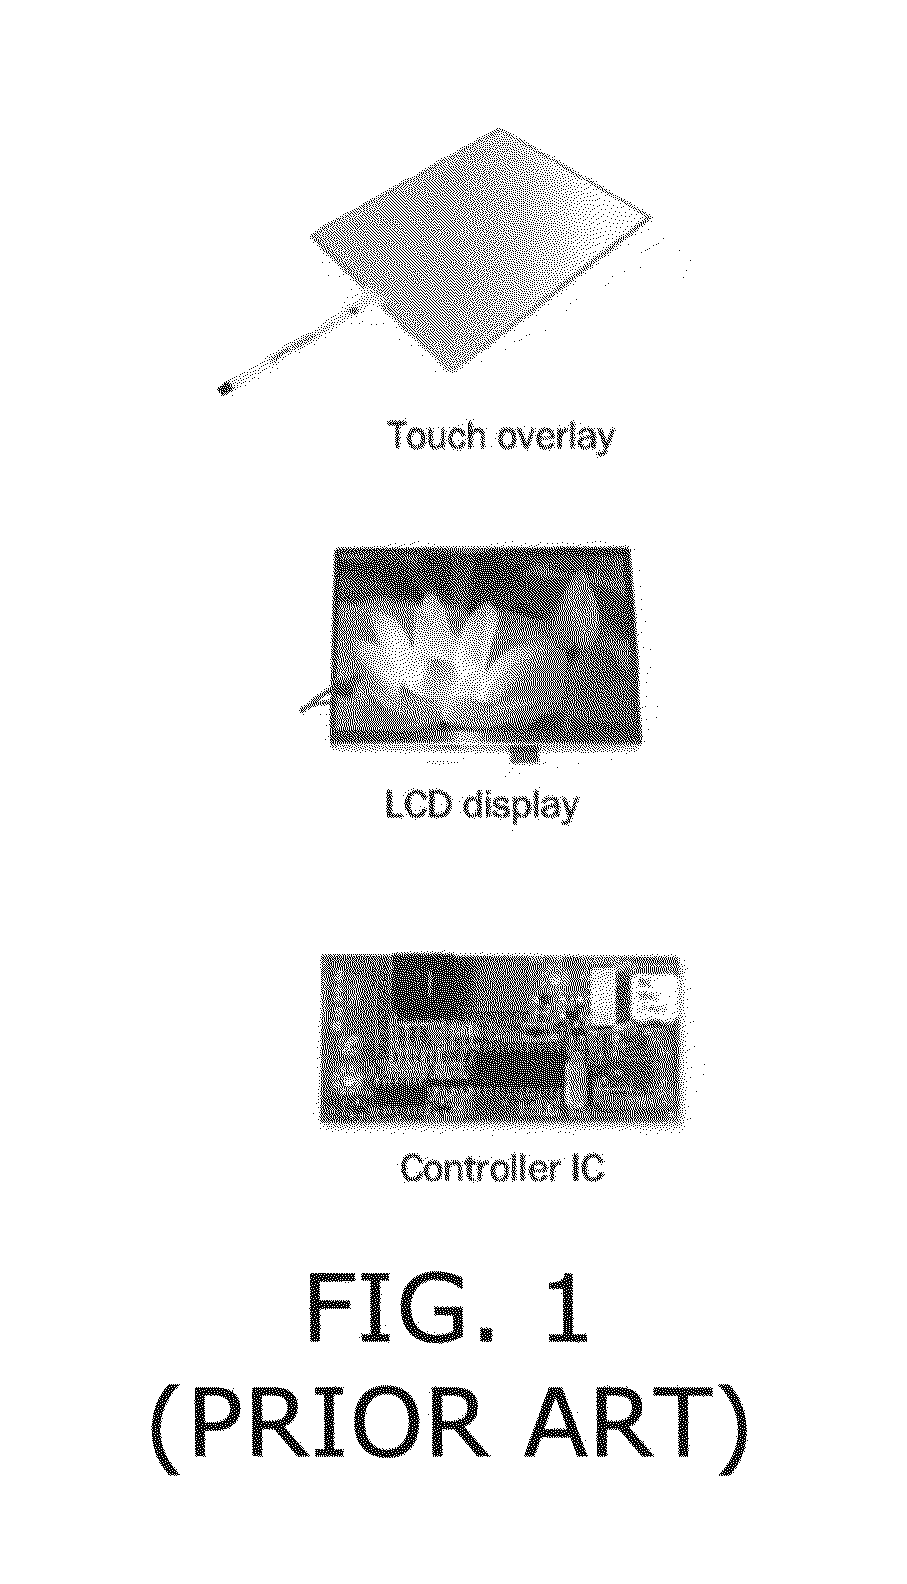 Optical touch screen systems using reflected light